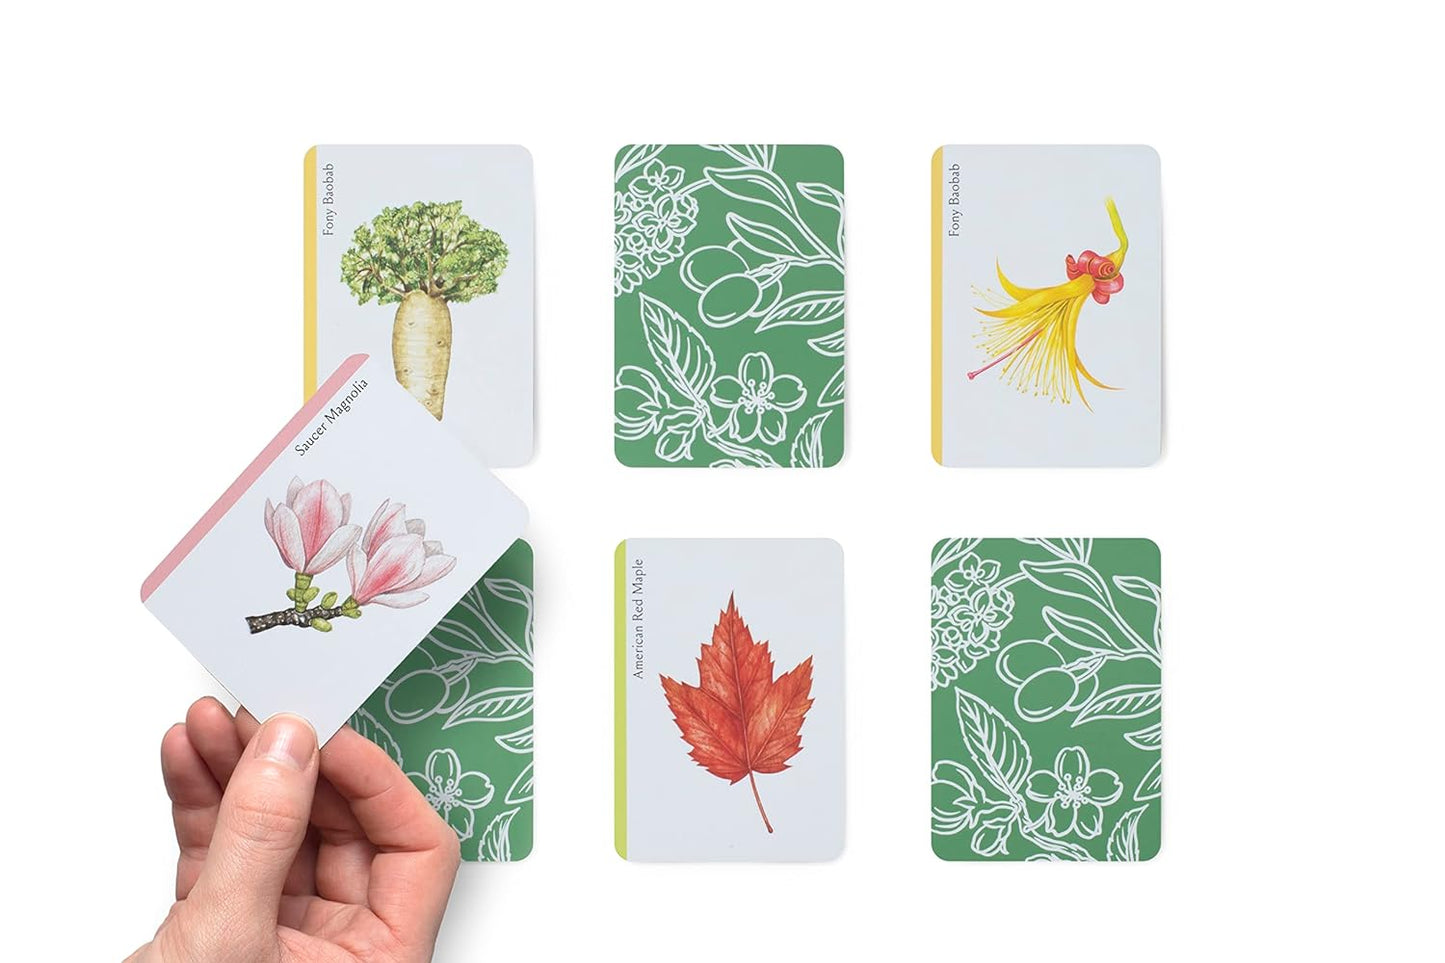 Tree Families Card Game